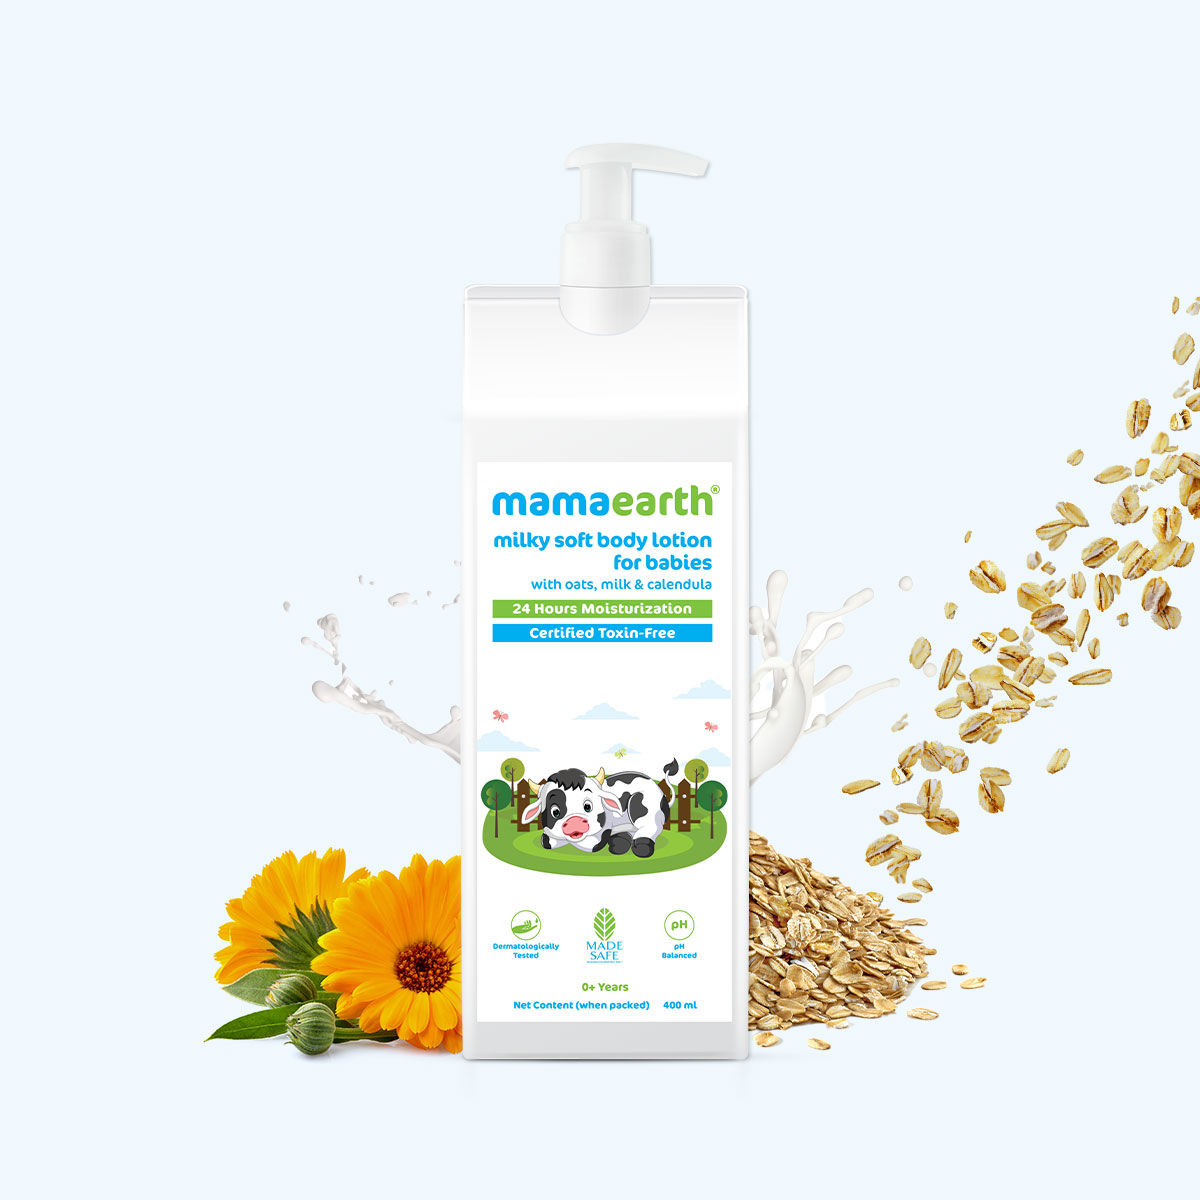 Mamaearth Milky Soft Body Lotion For Babies With Oats- Milk & Calendula